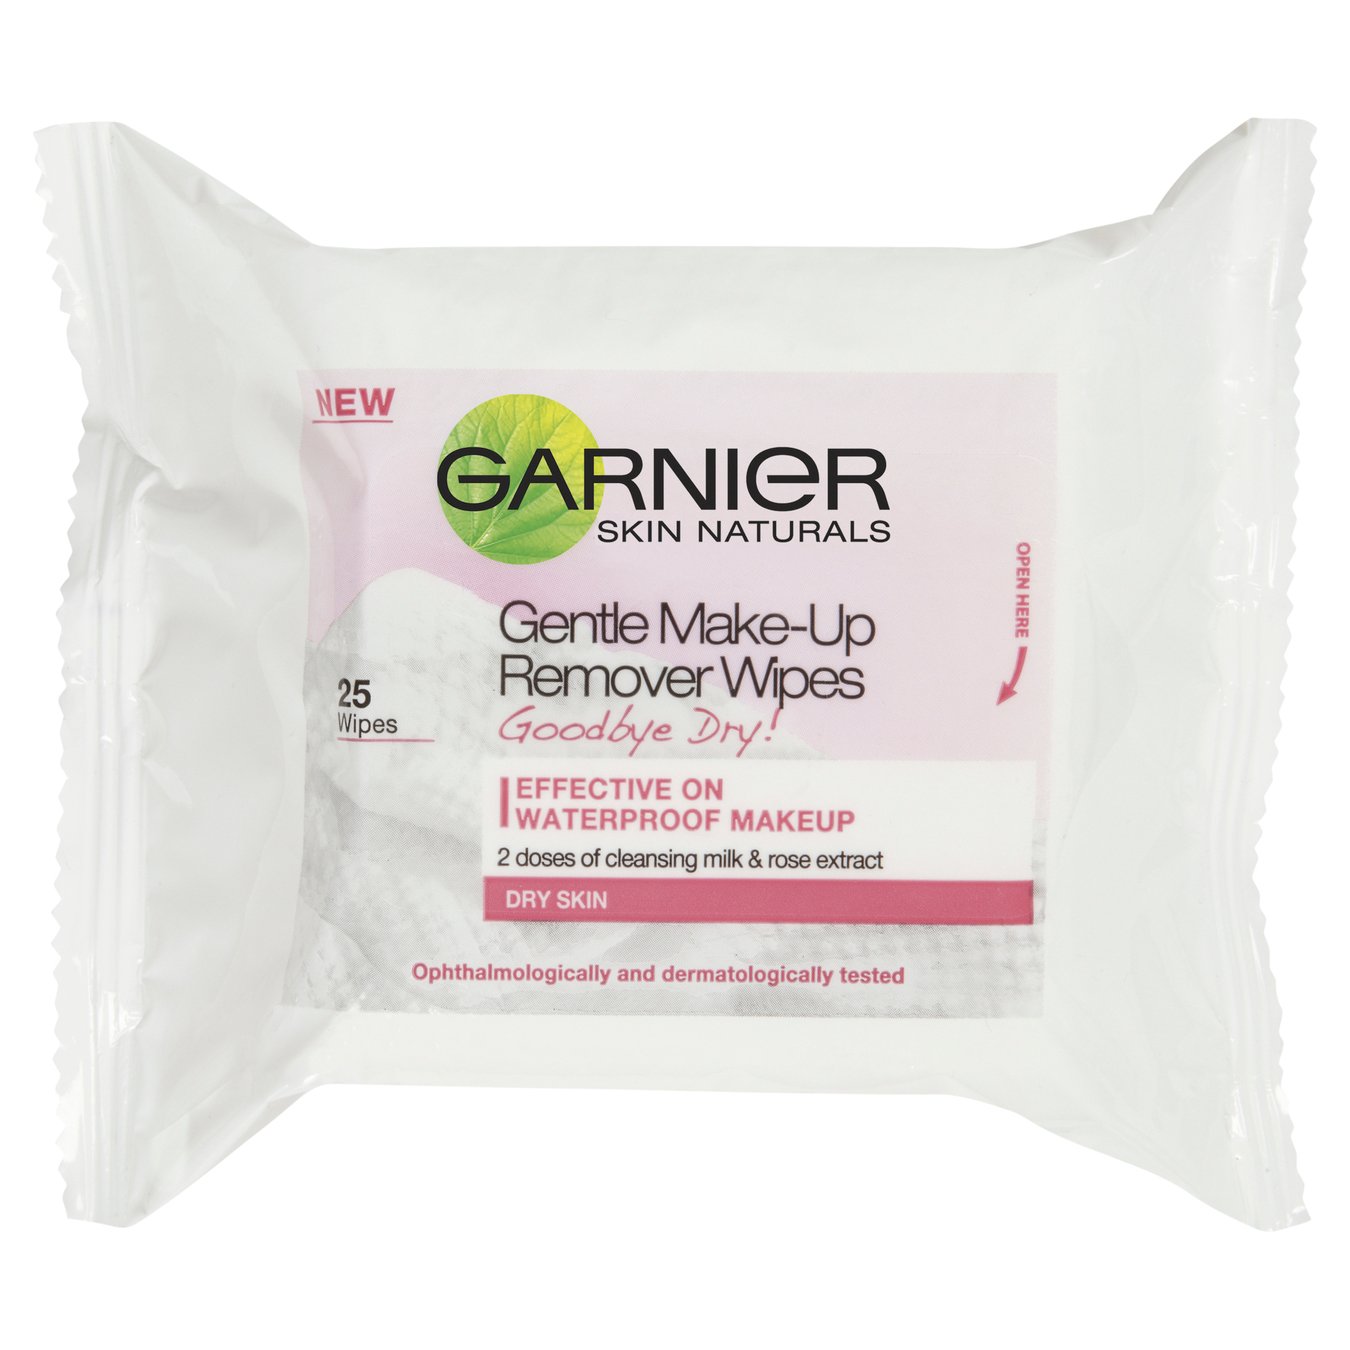 Moisture Match Goodbye Dry Makeup Remover Wipes